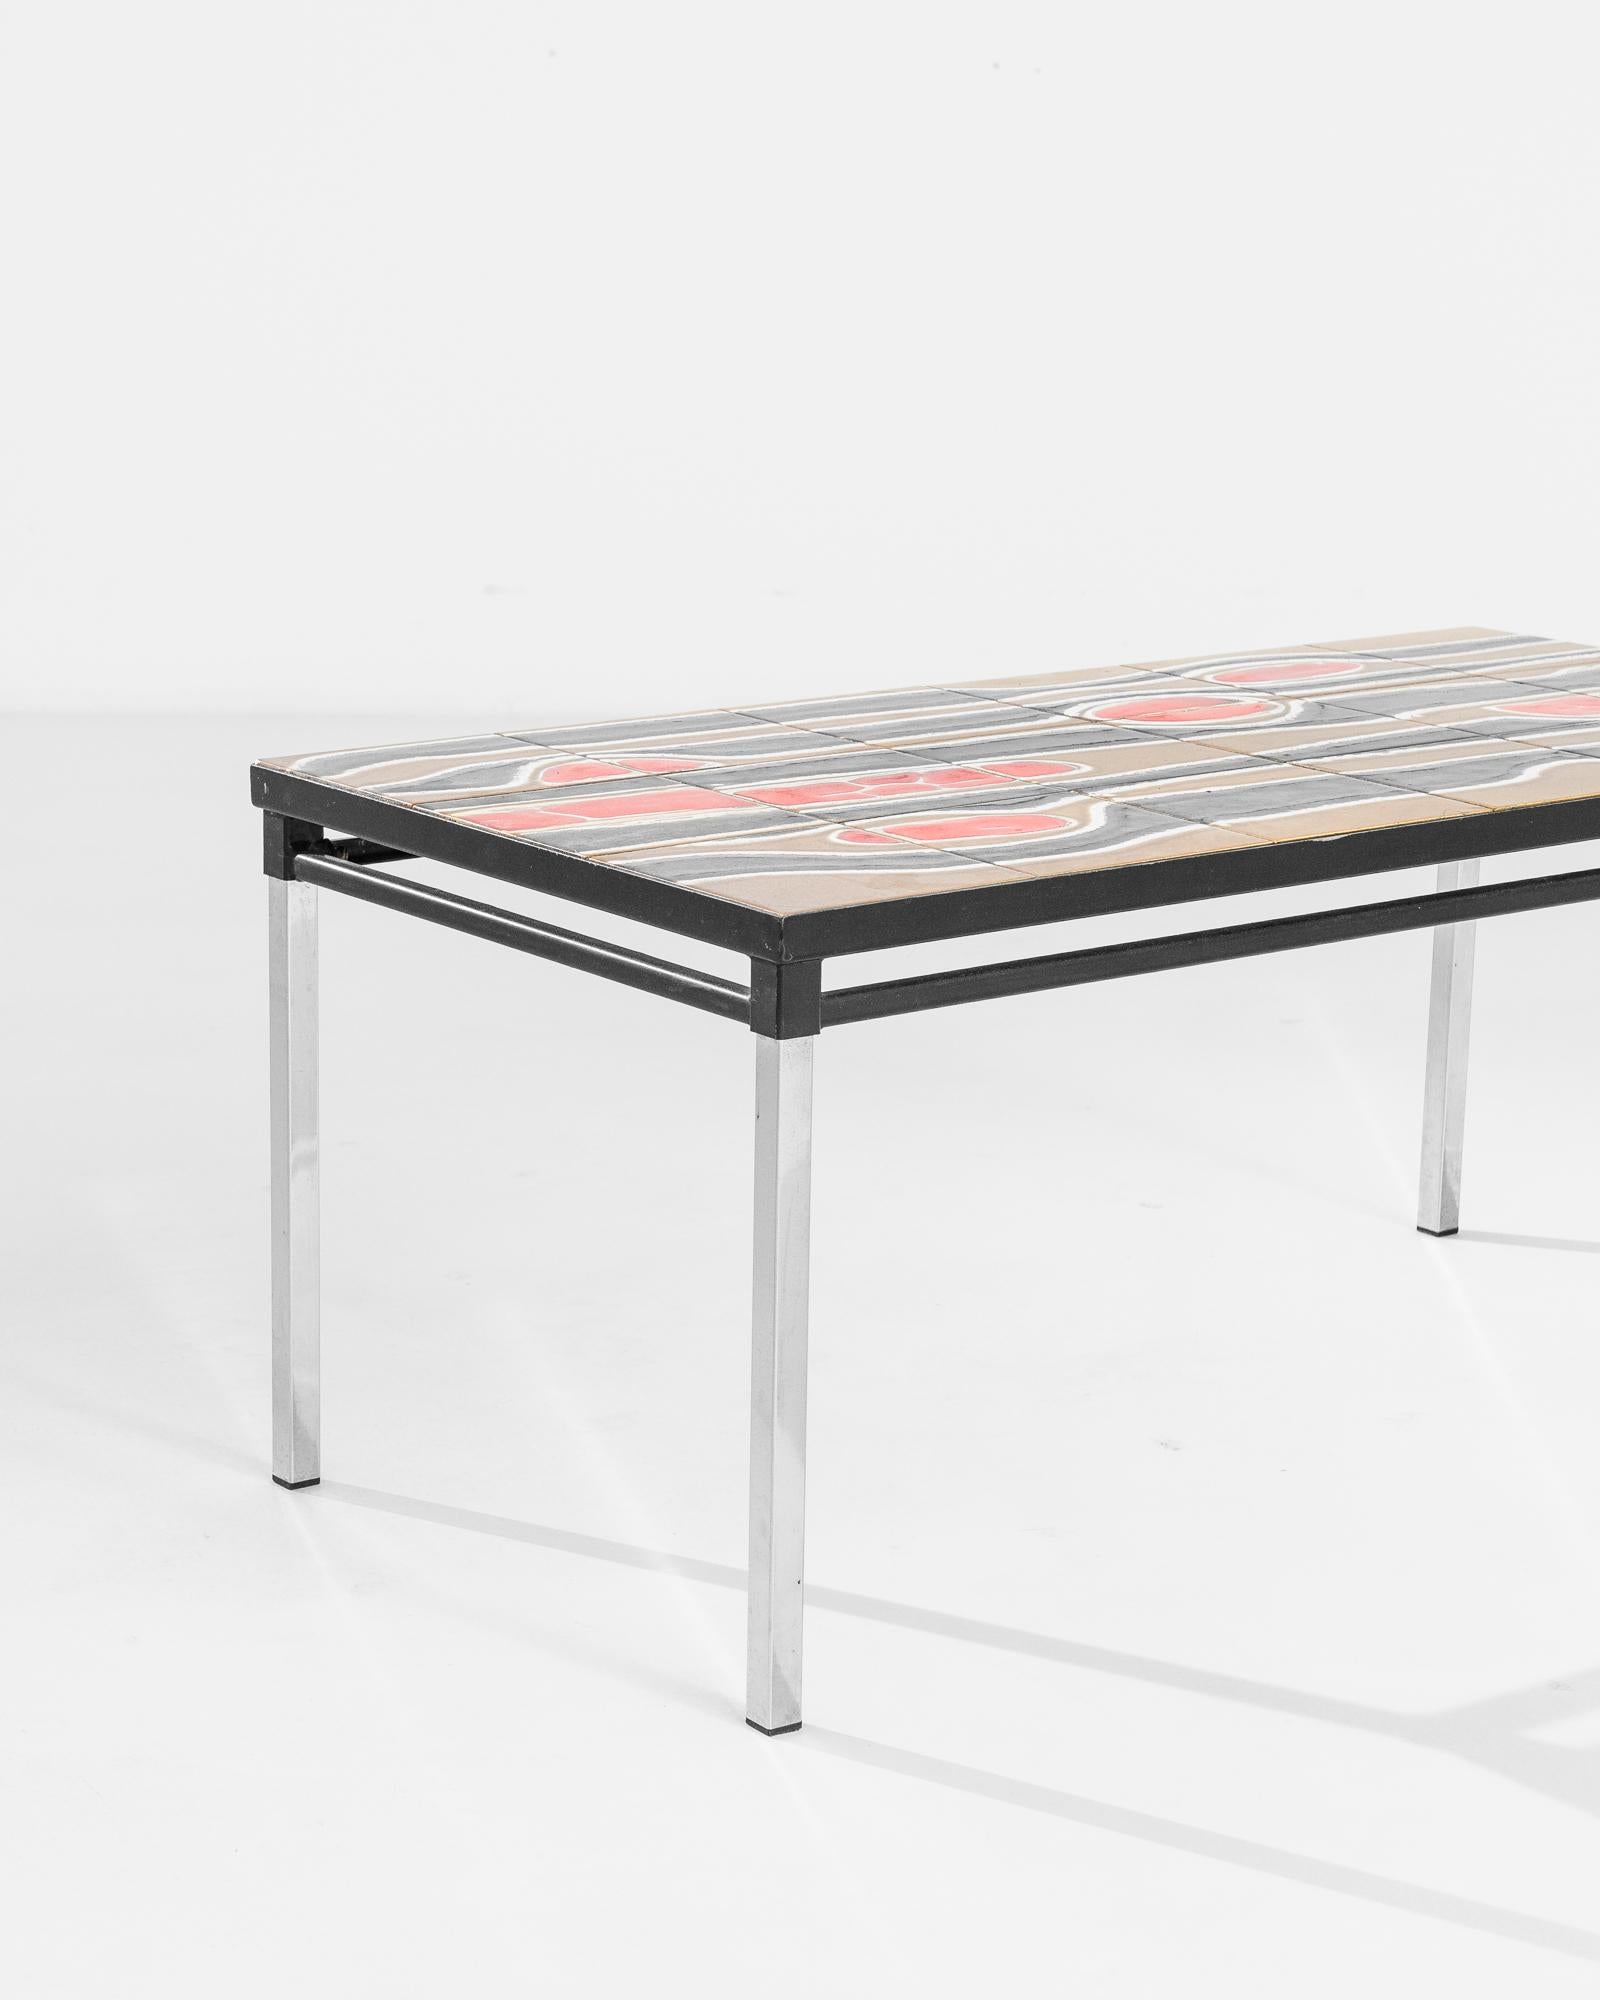 A metal table with porcelain top from France, produced circa 1960. A sleek, metal frame of silver legs and black stretchers support a tiled top in this mid-century table. A porcelain grid of 18 tiles forms an out of this world abstract pattern in